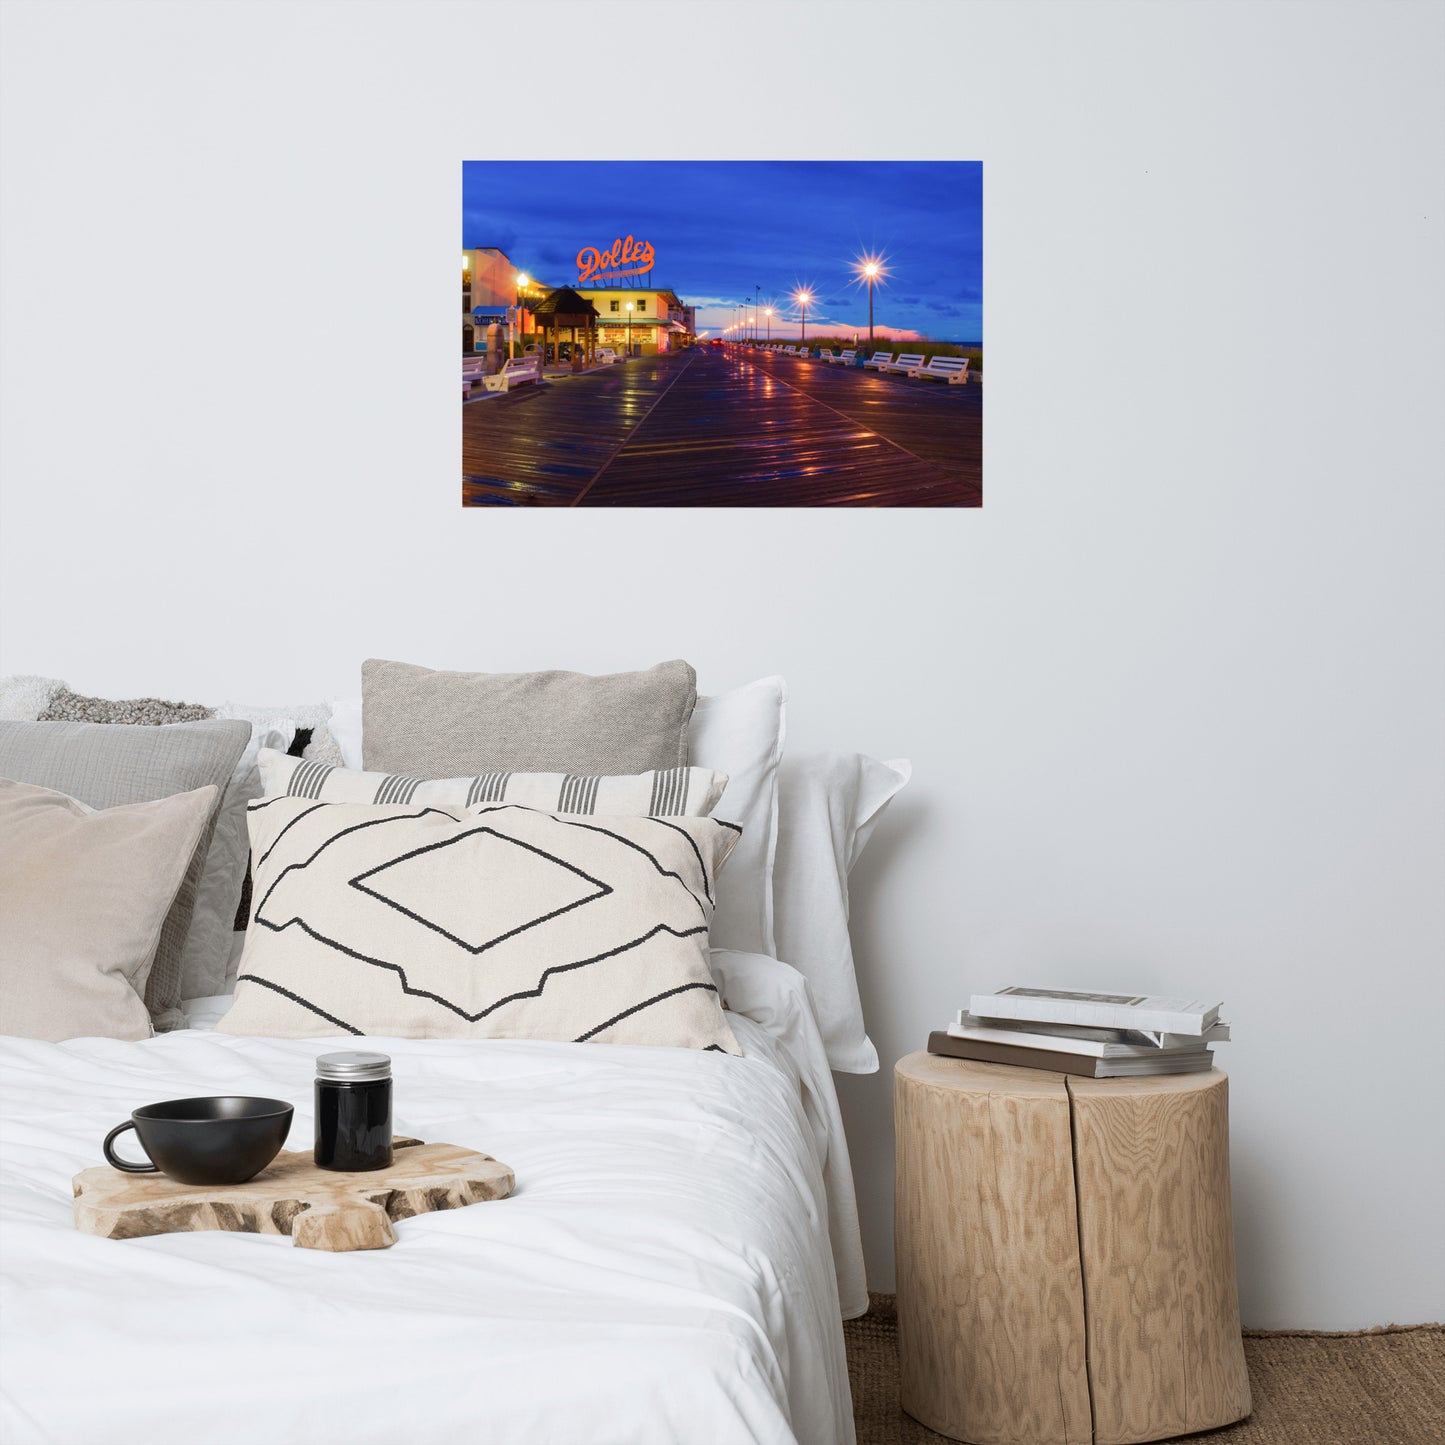 Early Morning At Dolles Urban Landscape Loose Unframed Wall Art Prints